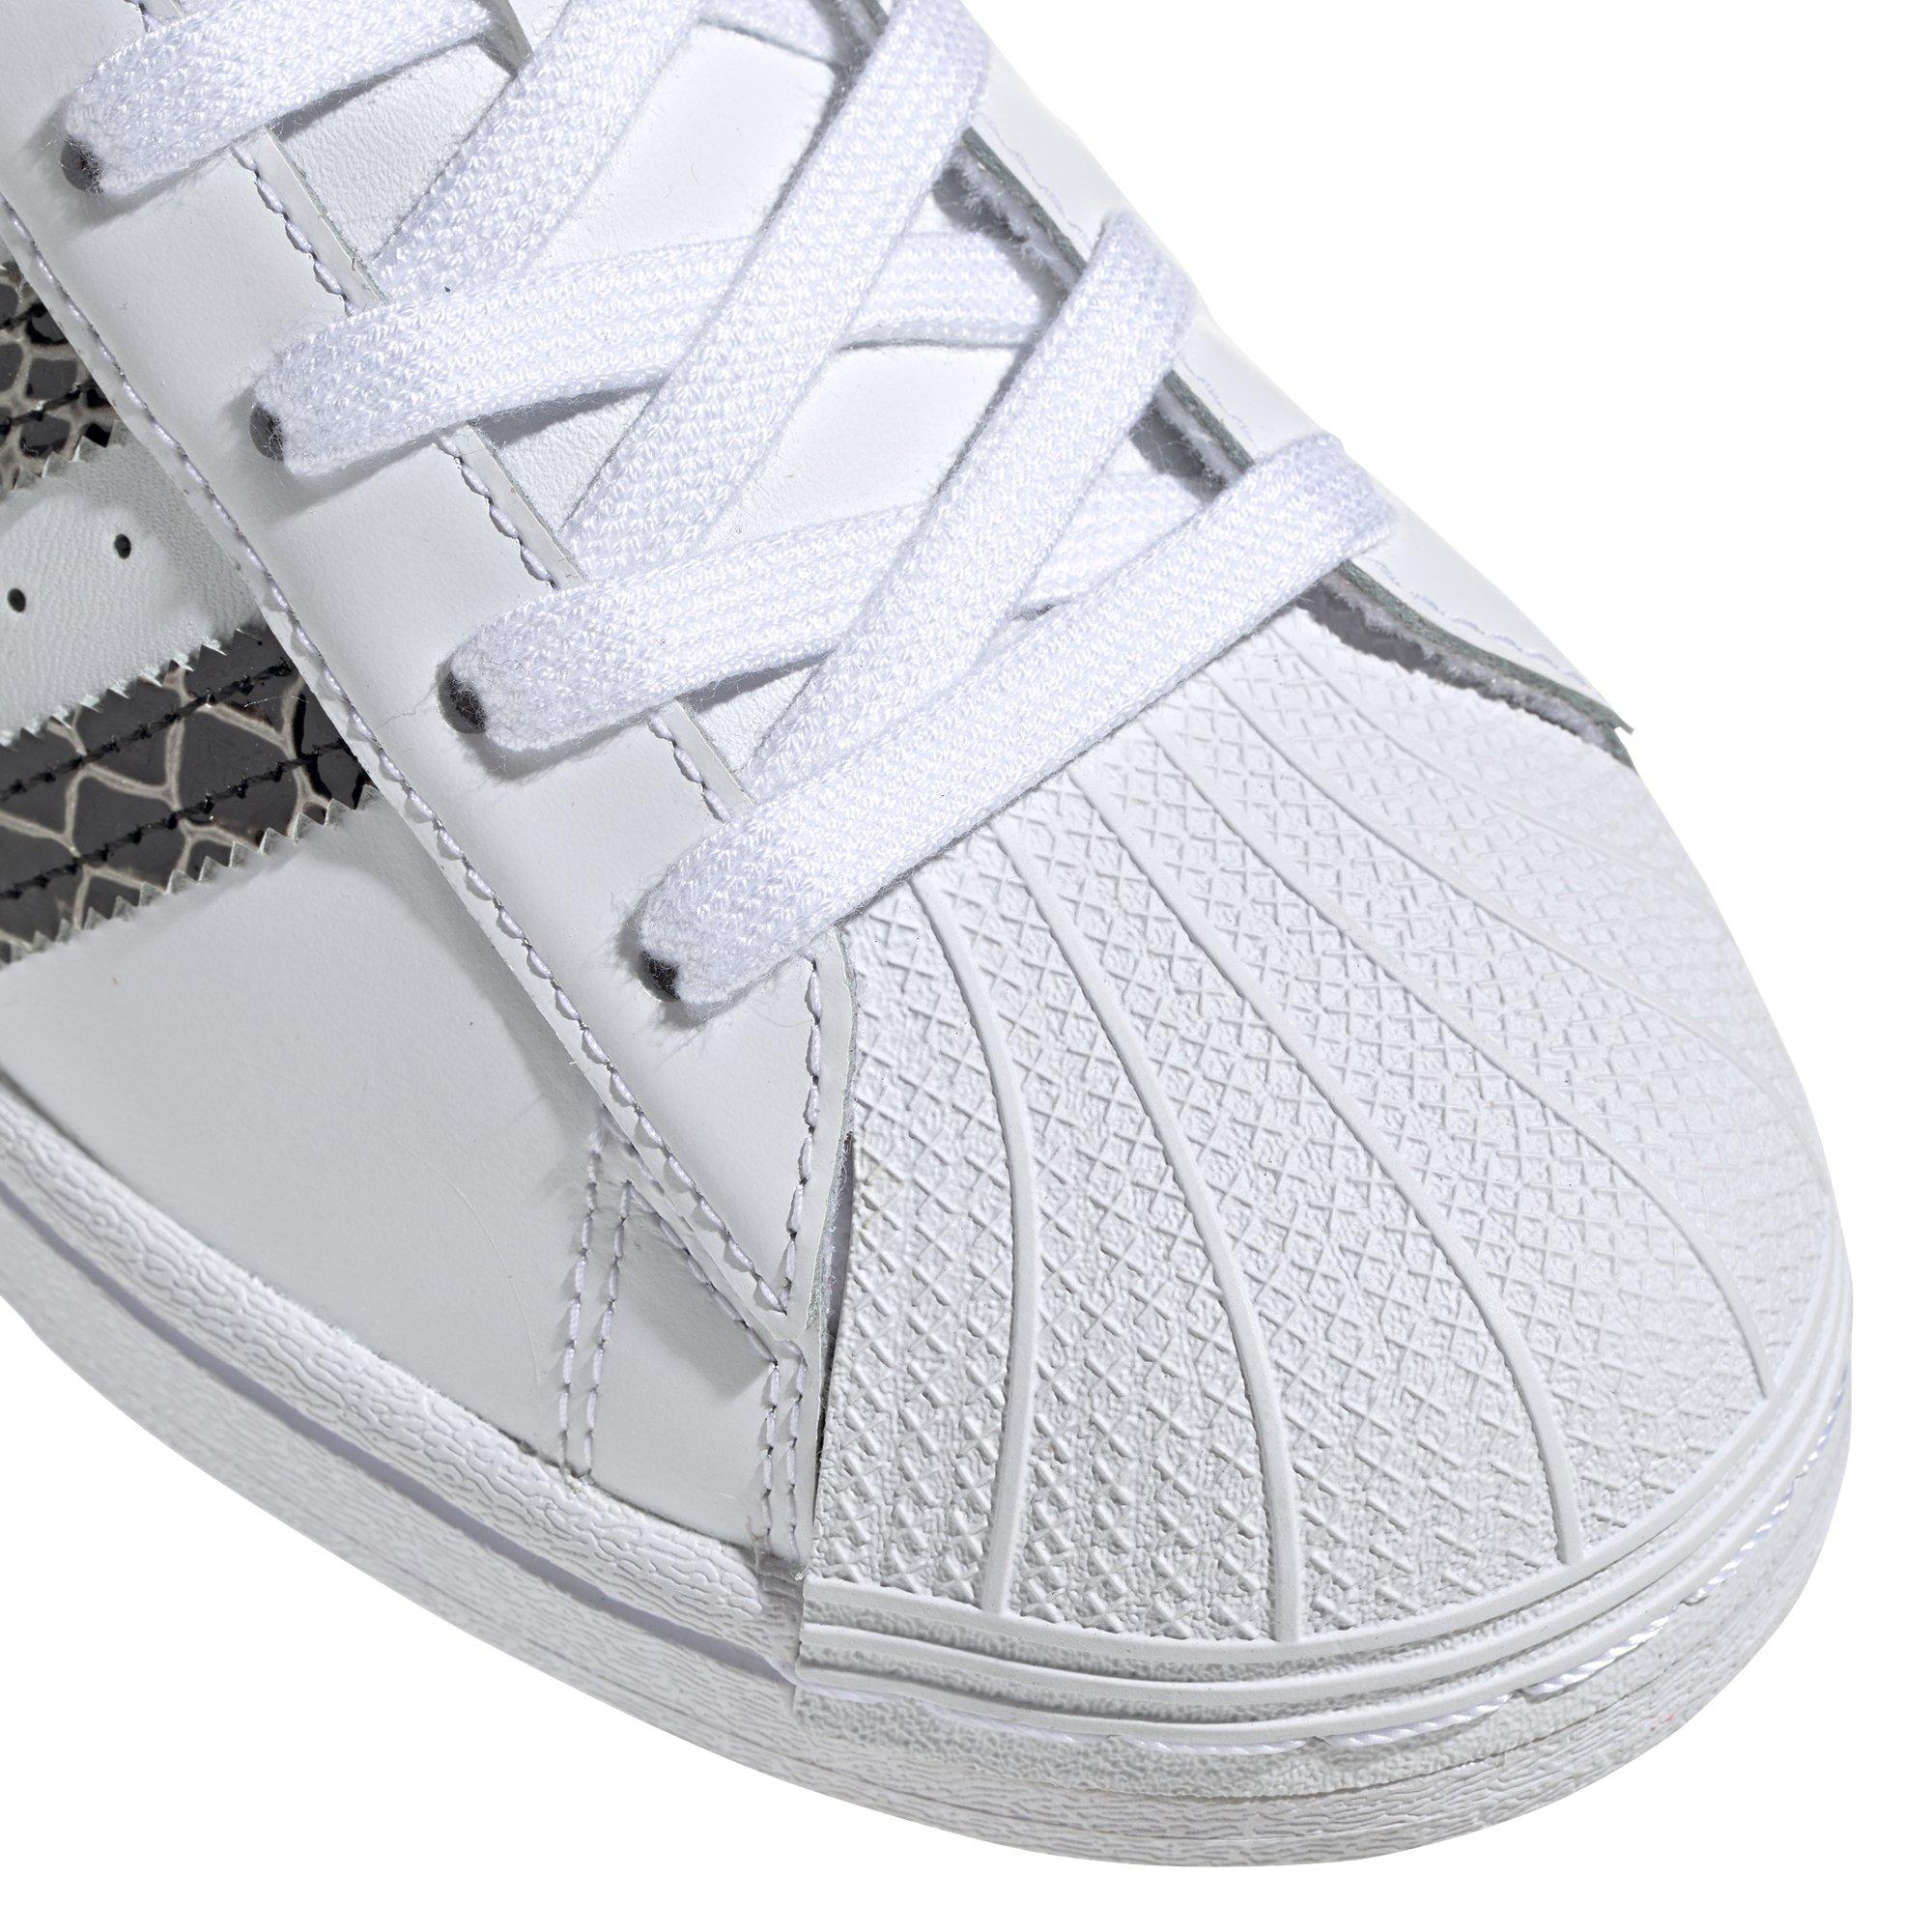 adidas superstar white and grey